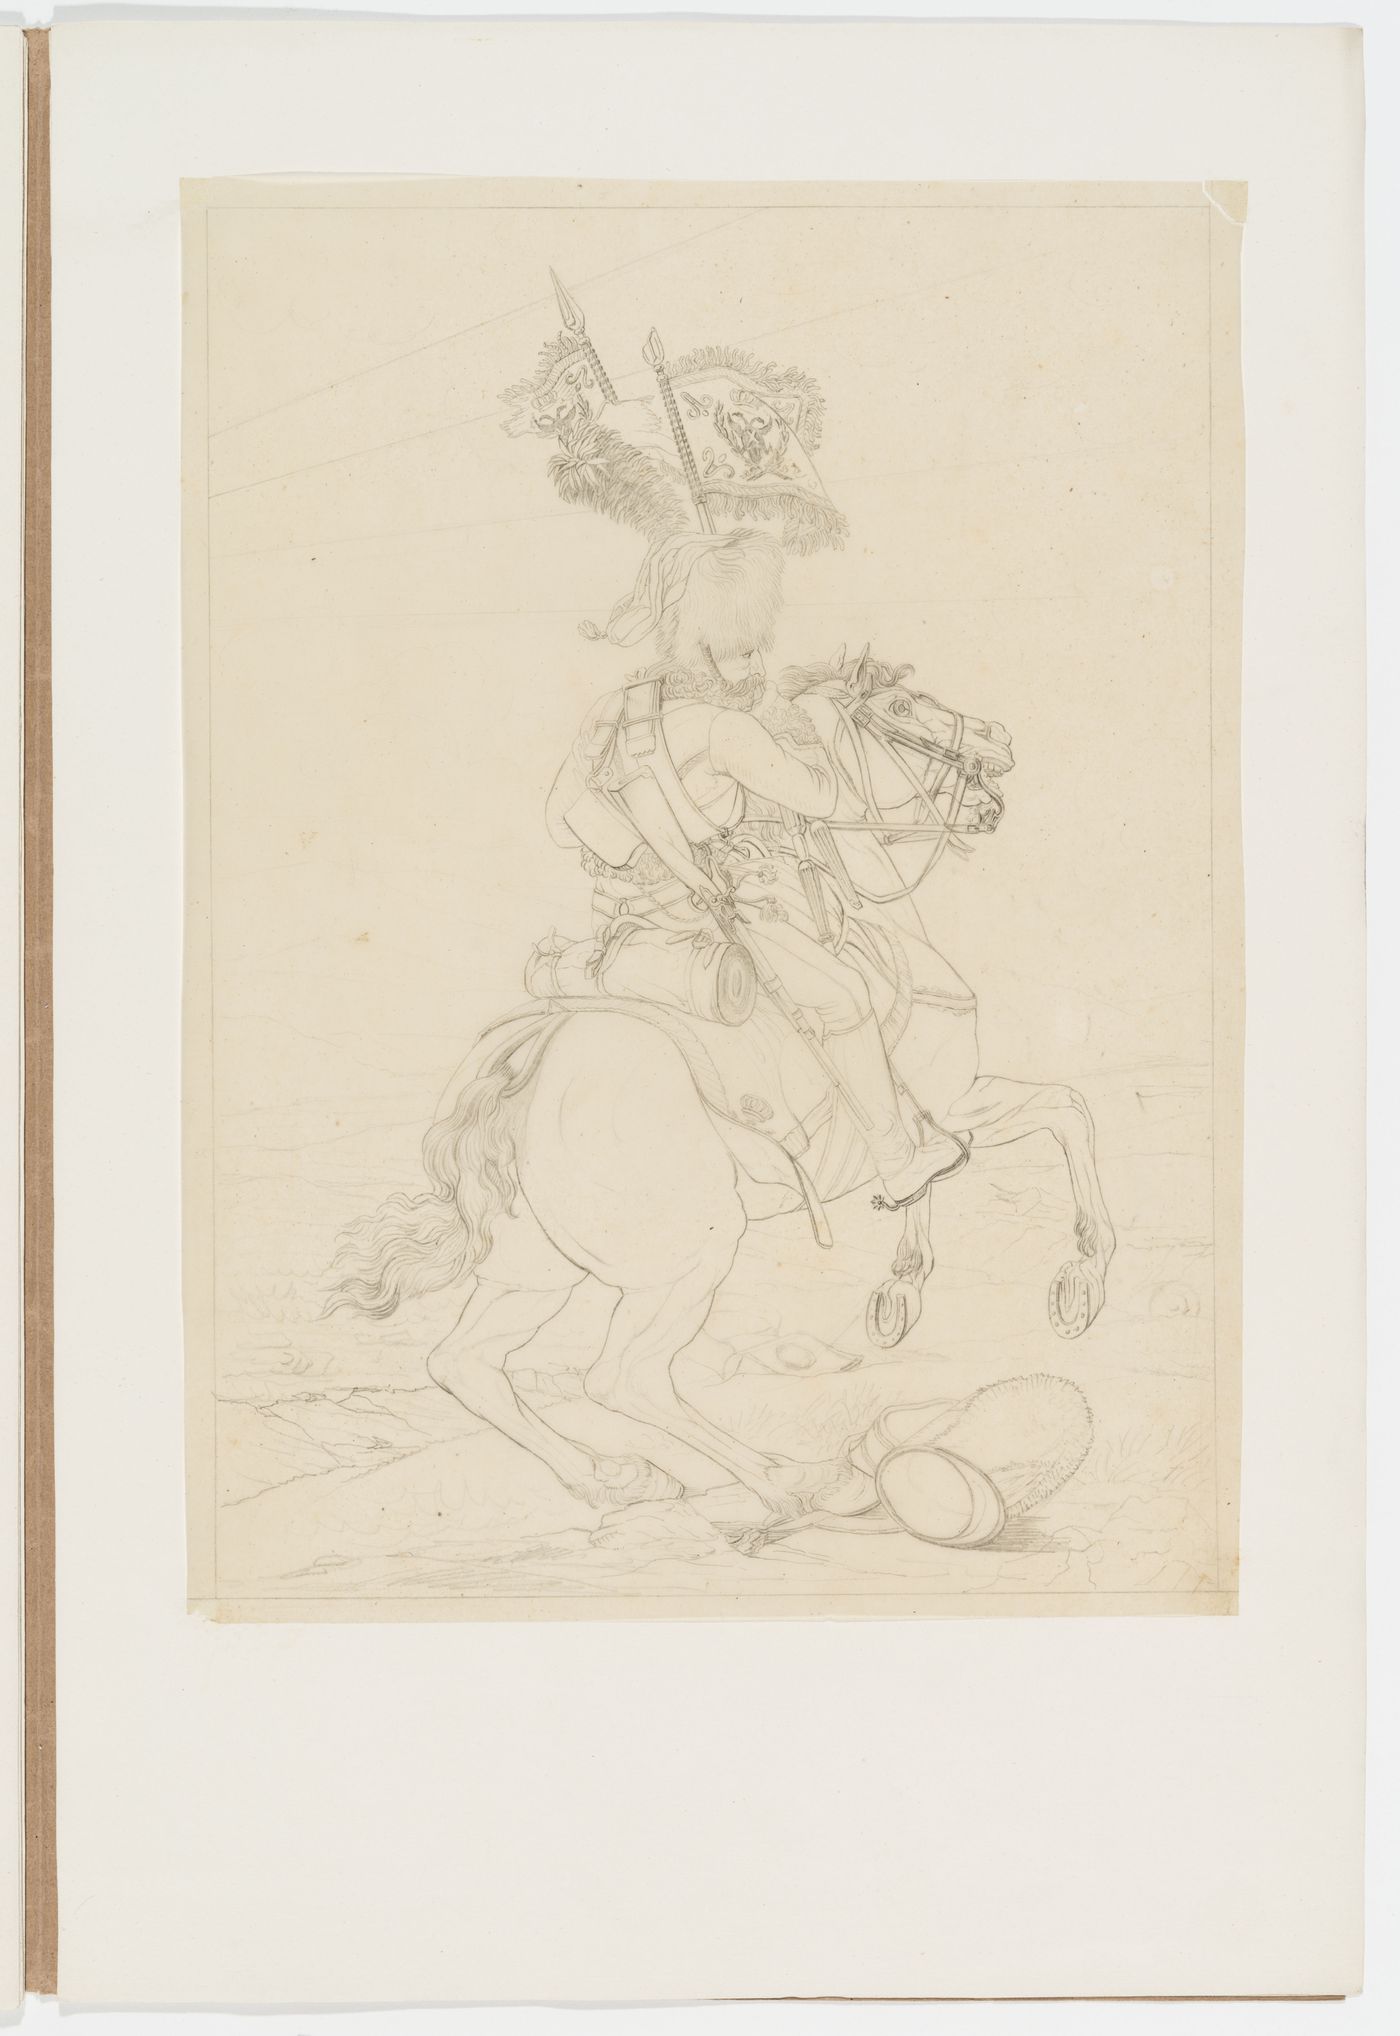 Sketch of a cossack on a horse